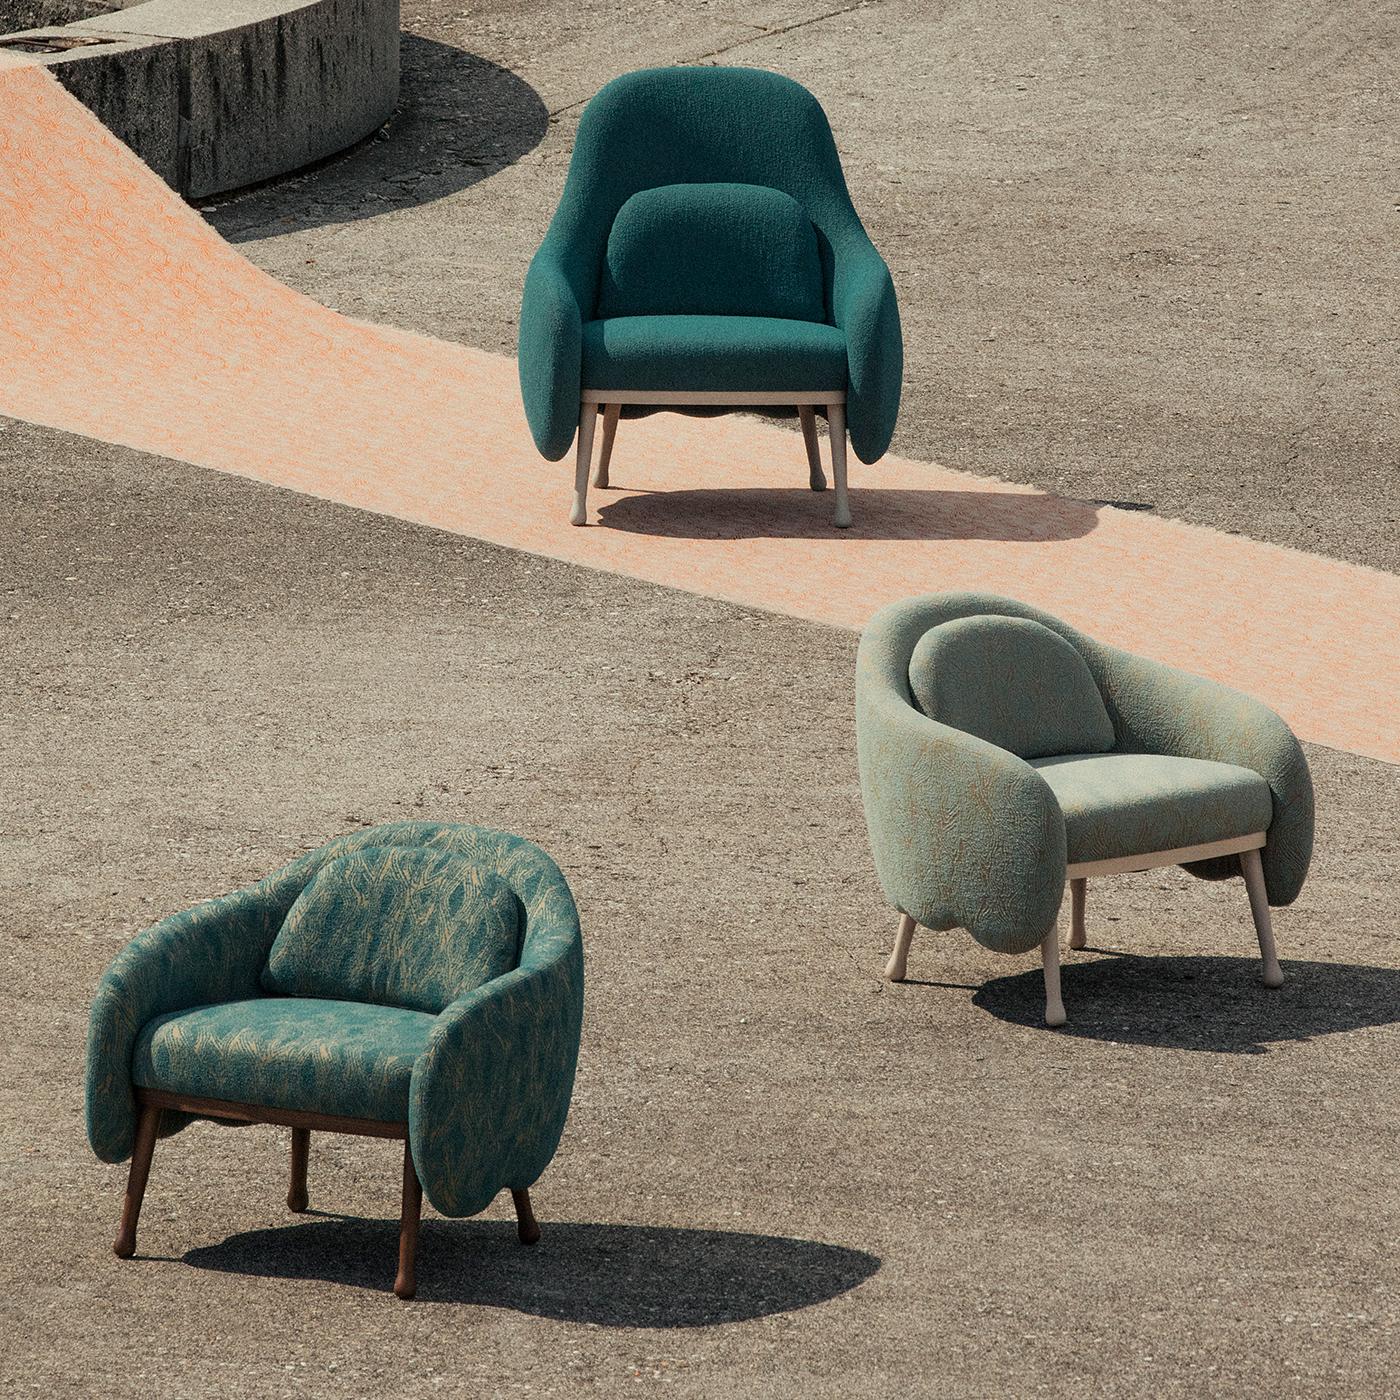 The delicate shape of flower corollas inspired this splendid armchair from the Corolla series, stunning in its scalloped lower profile, which seals the contours of the enveloping seat also incorporating the sloping armrests. The slanted legs in